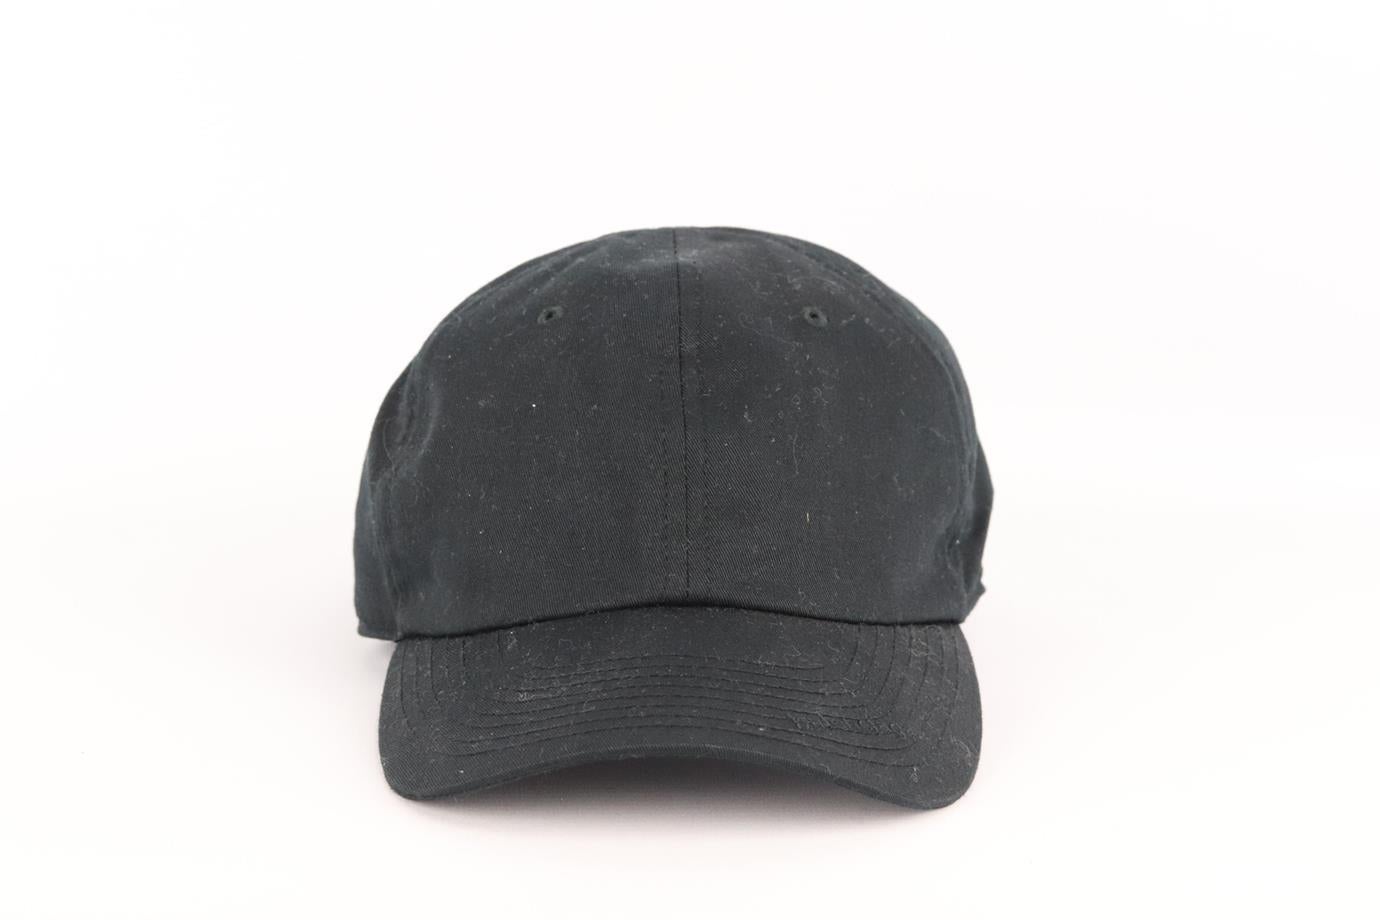 Balenciaga logo embroidered cotton twill baseball cap. Black. Fastening at back. 100% Cotton. Does not come with dustbag or box. Size: Large (58 cm). Brim Width: 2.8 in. Very good condition - No sign of wear; see pictures.